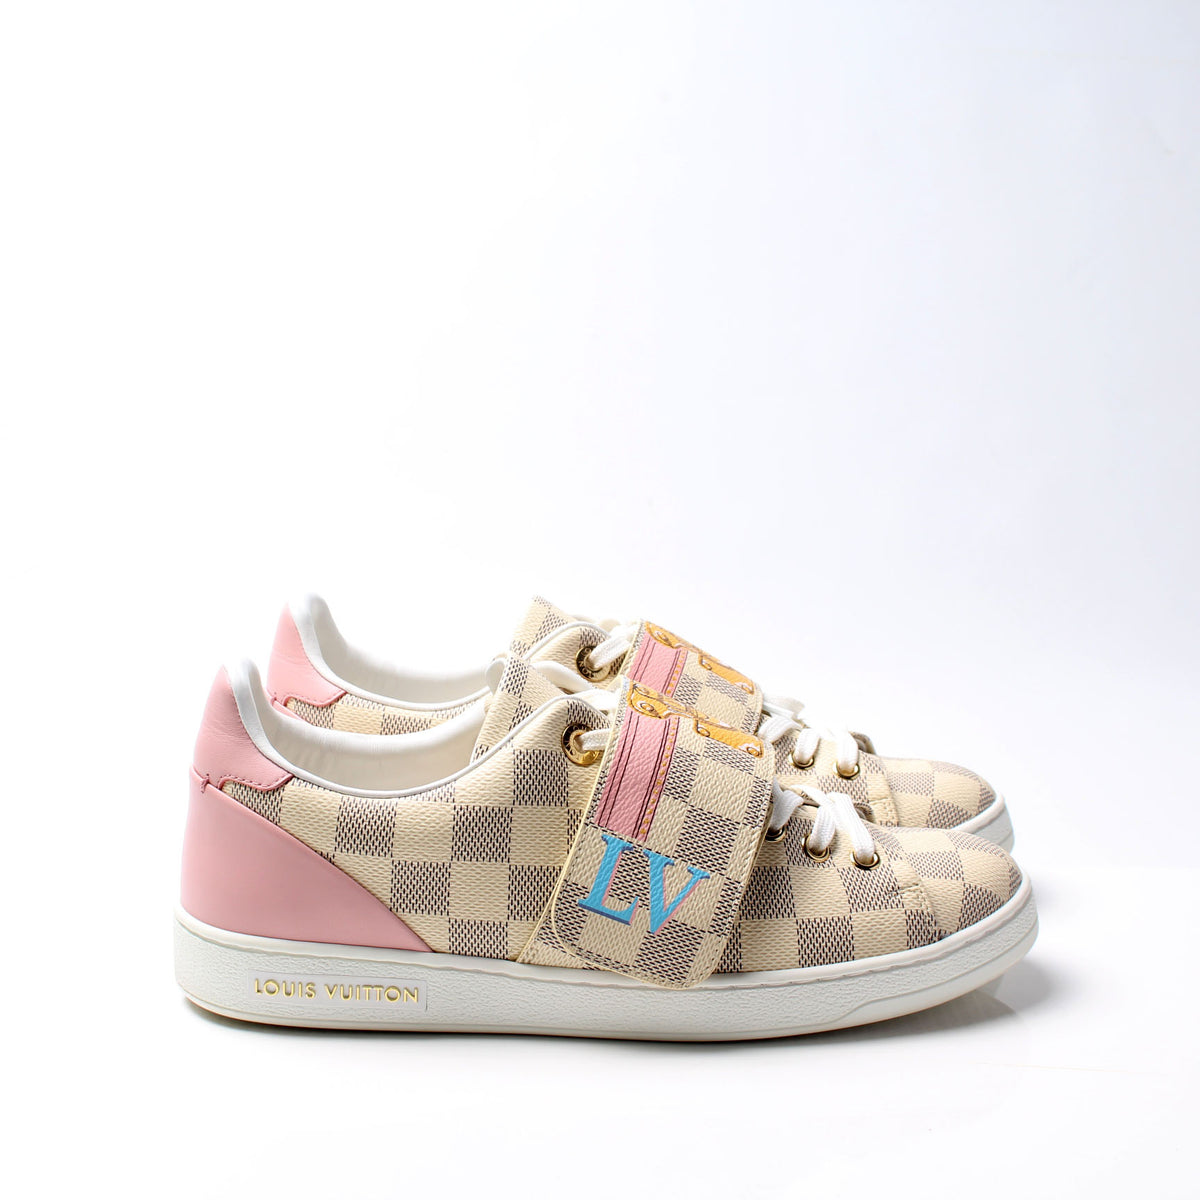 Frontrow Summer Trunks Damier Azur Sneakers Size 37.5